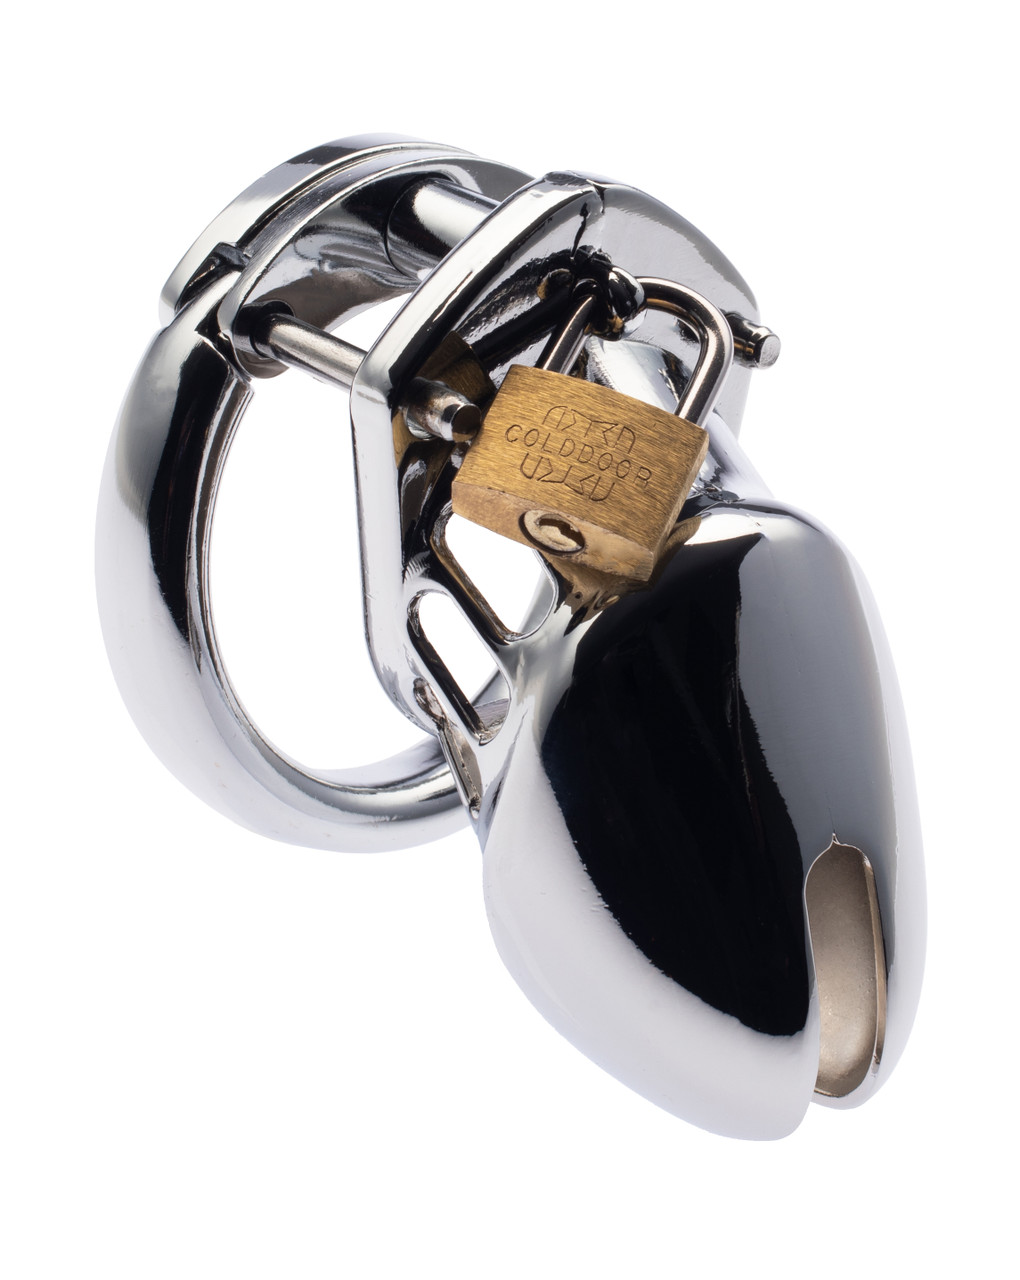 Kink Range Spiraled Chastity Cage 45mm – BKinky Adult Store